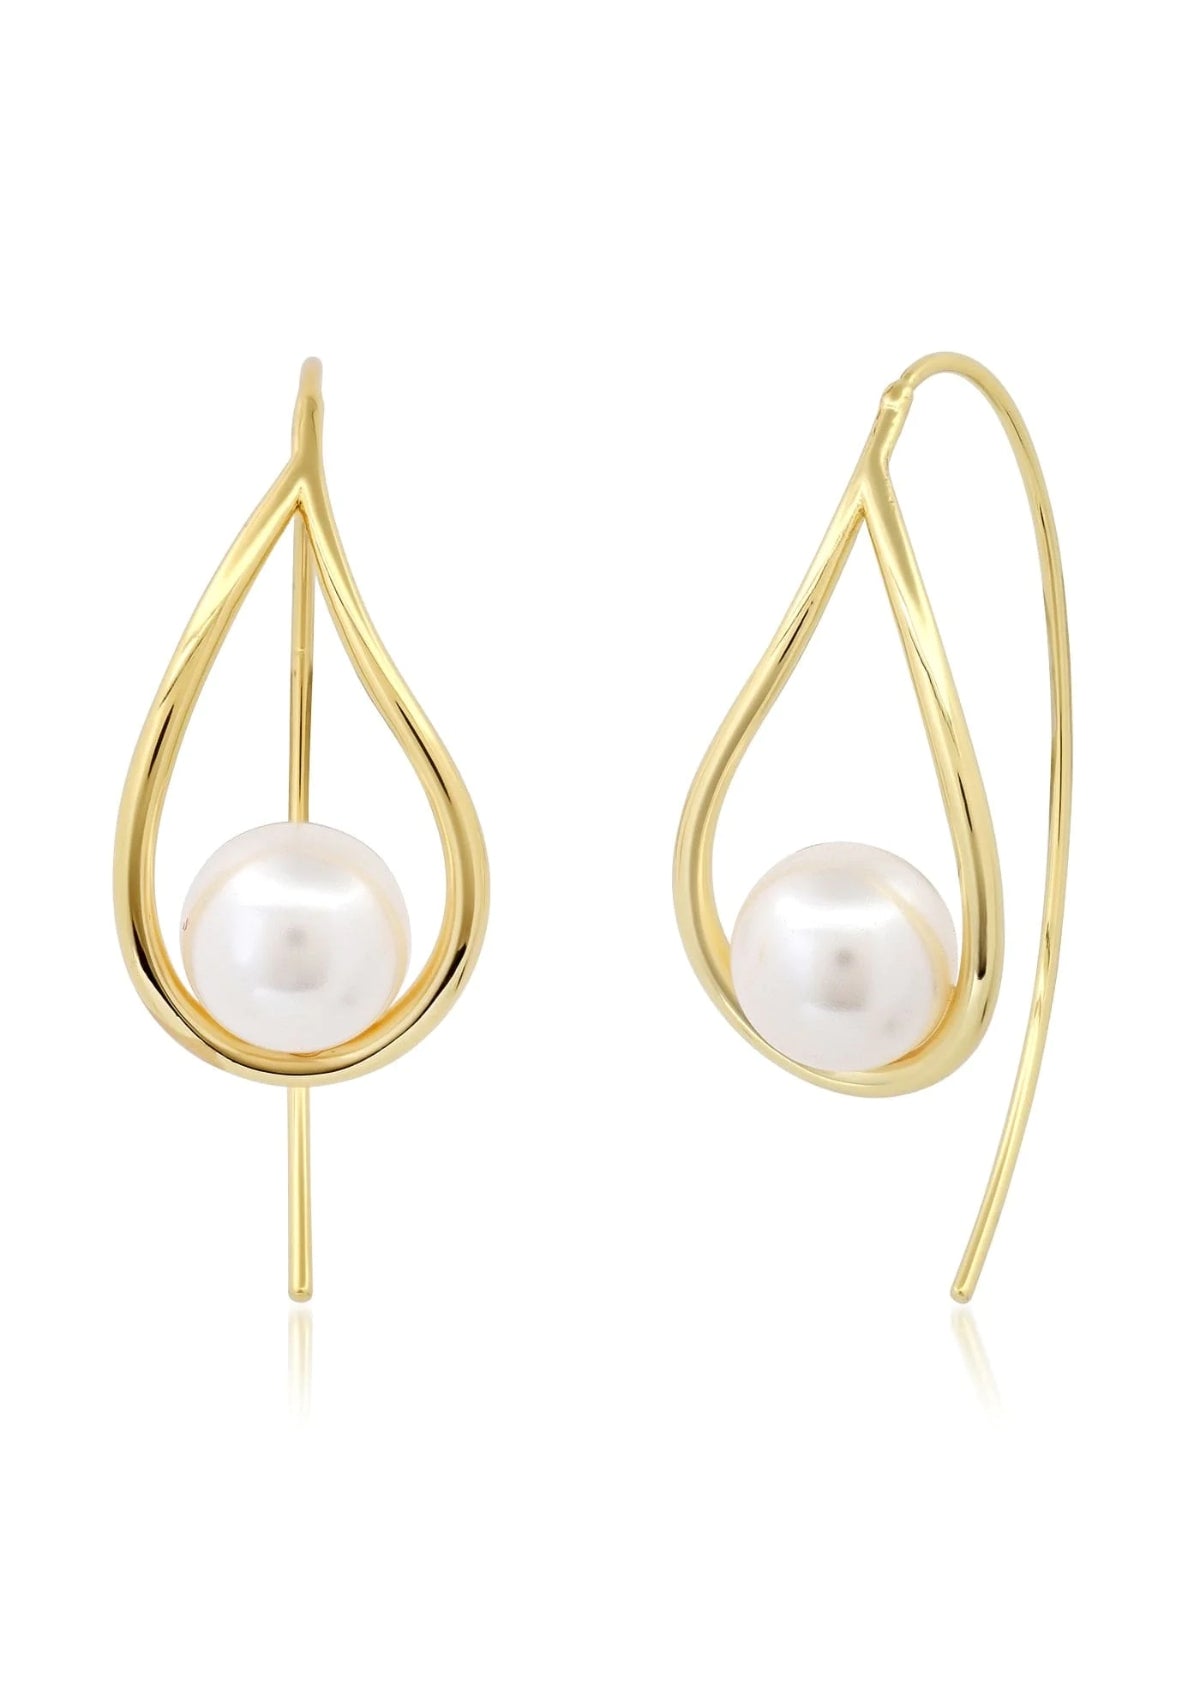 Gold Teardrop French Wire Earrings with Large Pearl -Tai Rittichai- Ruby Jane-